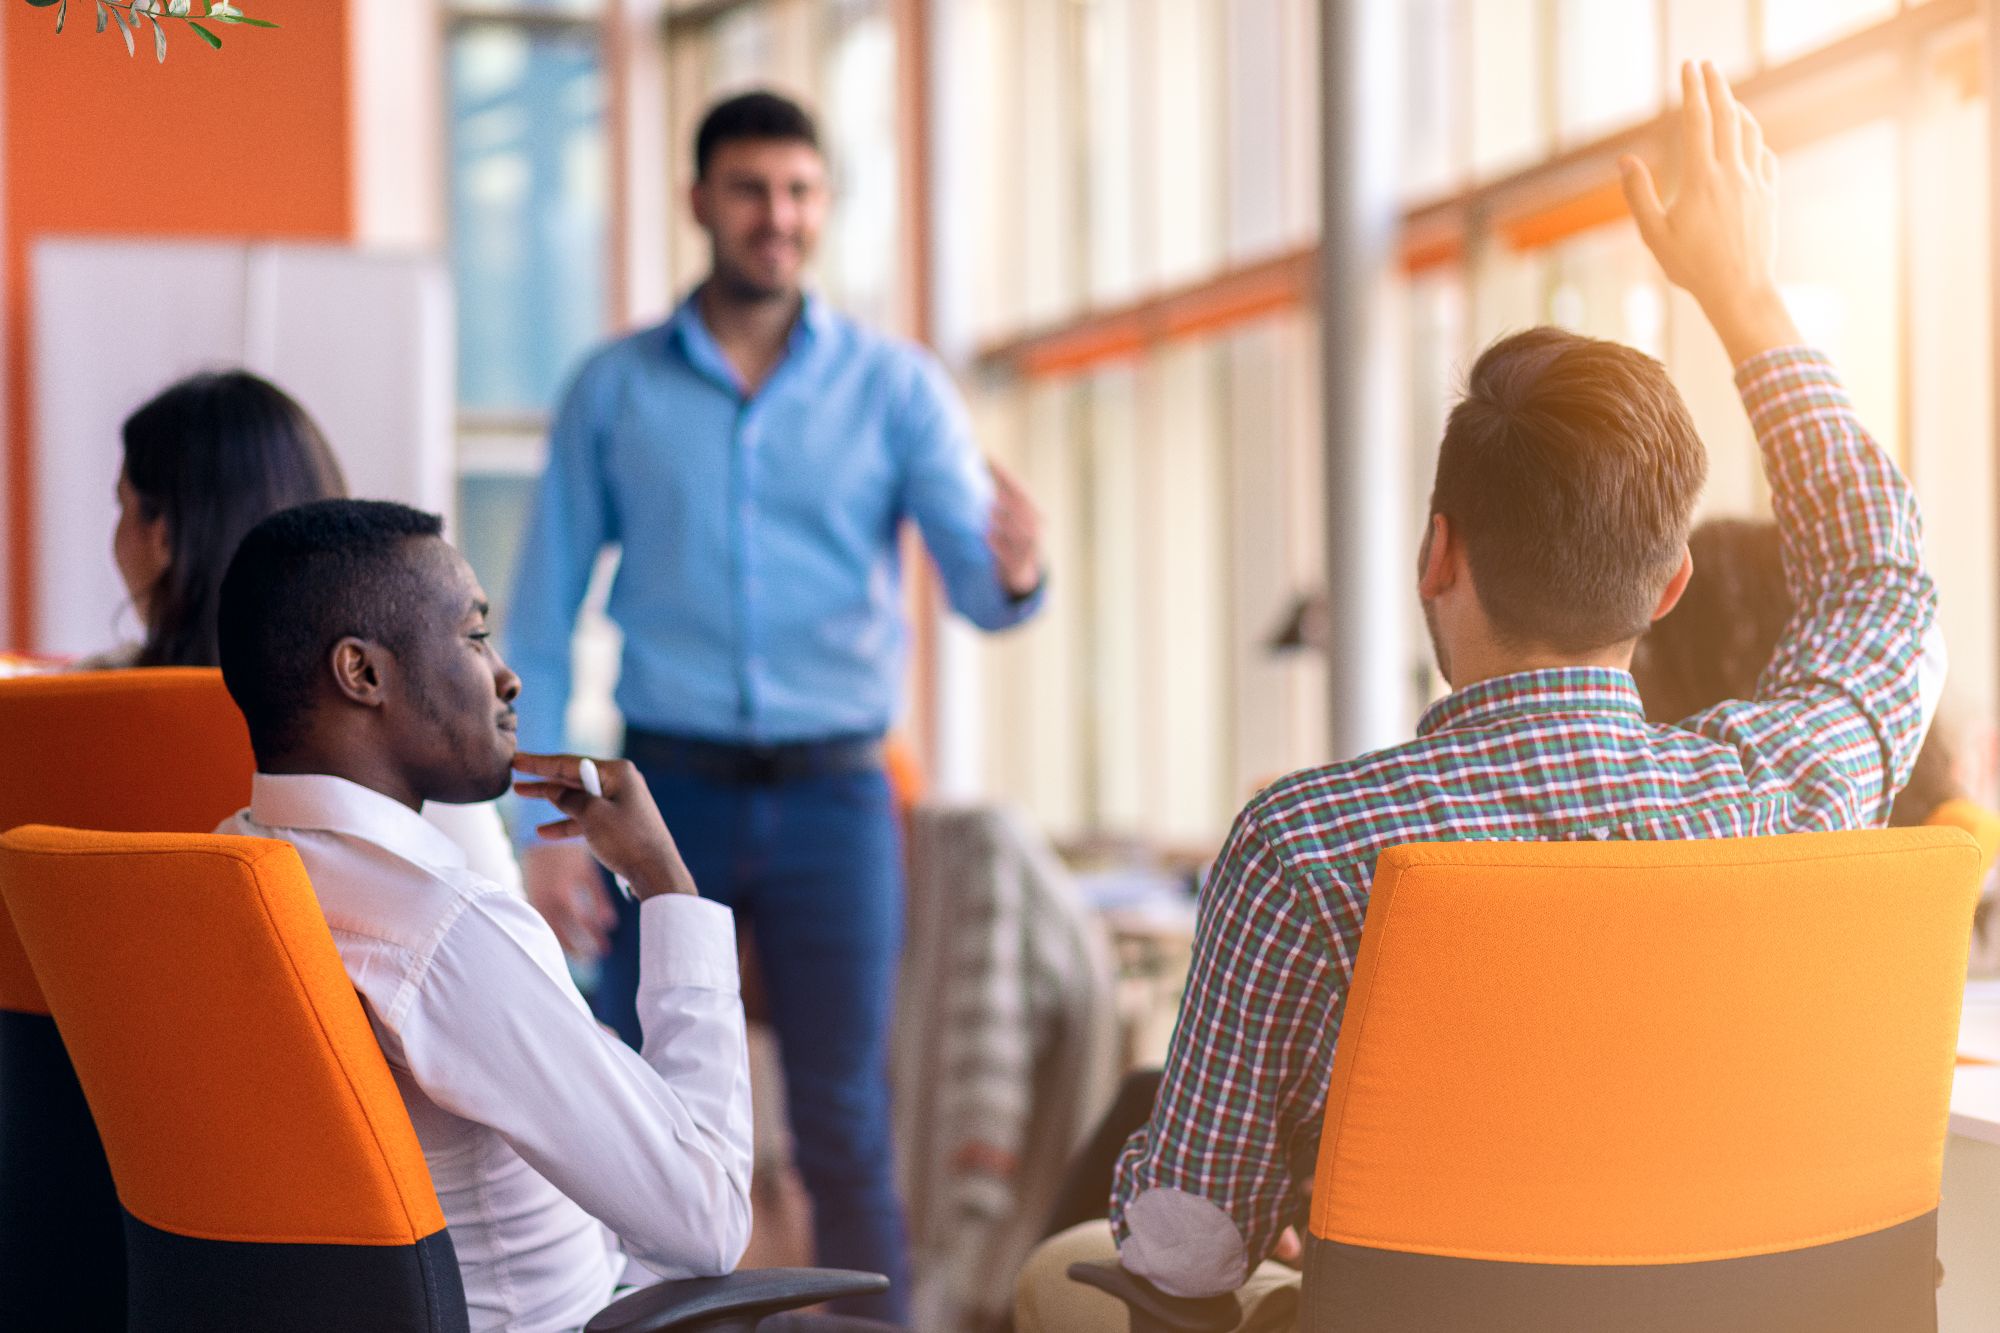 A young colleague raising hand during business meeting in an orange themed office - Professional Services